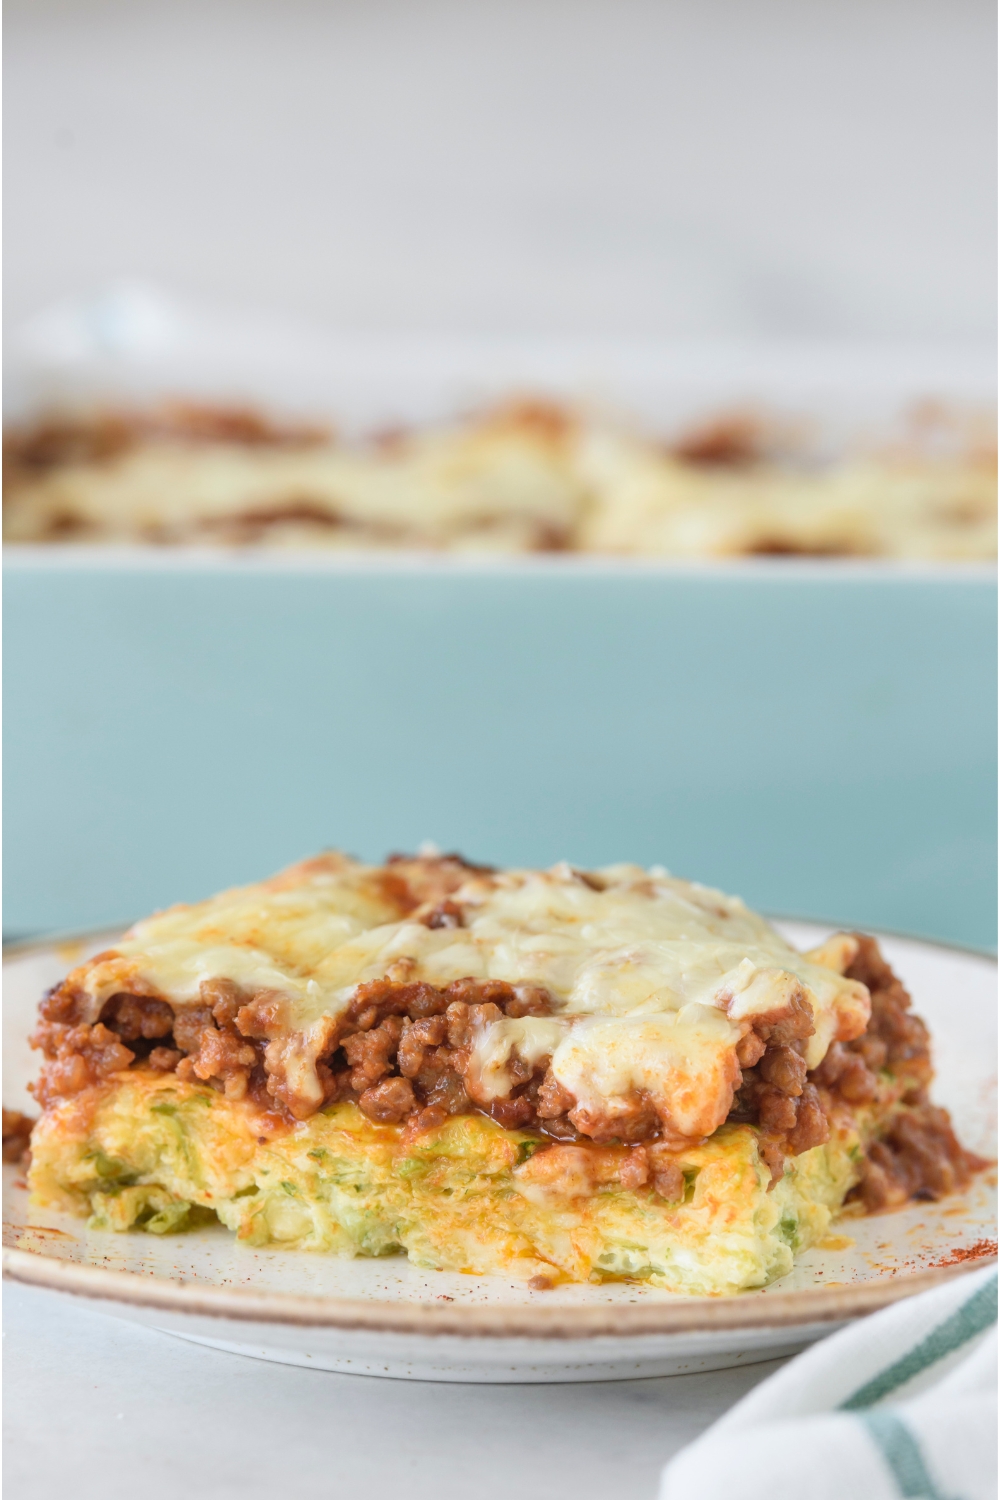 A square serving of zucchini pizza casserole topped with a layer of melted cheese. The rest of the casserole is in the background.